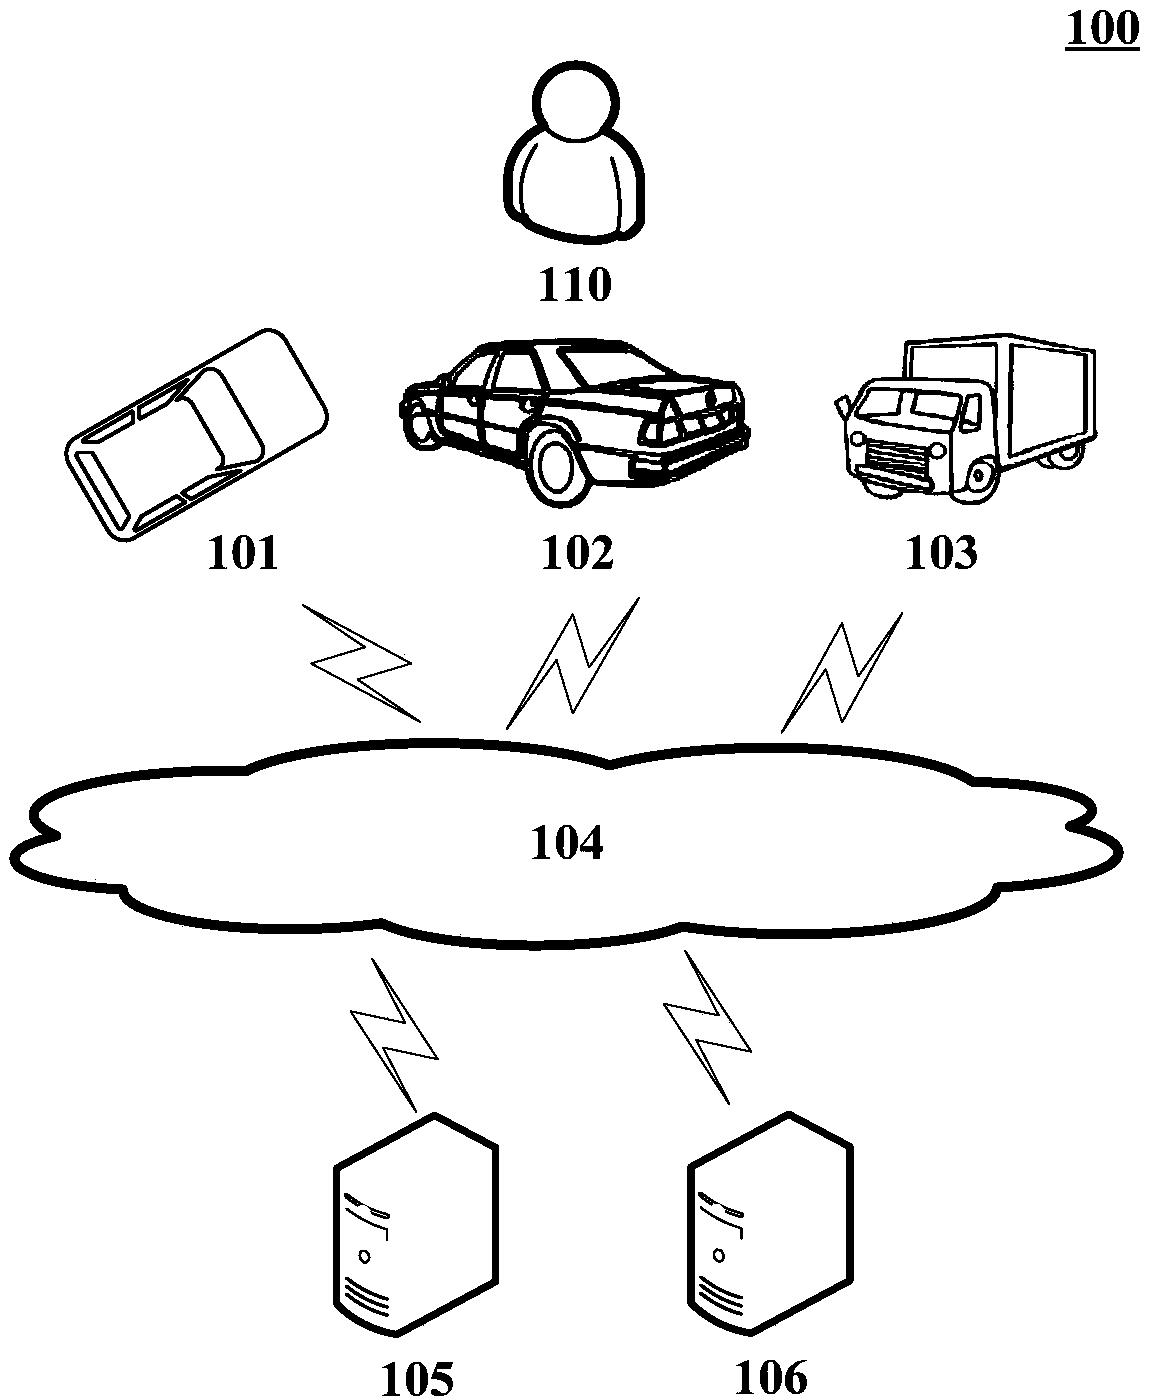 A method and apparatus for controlling a vehicle